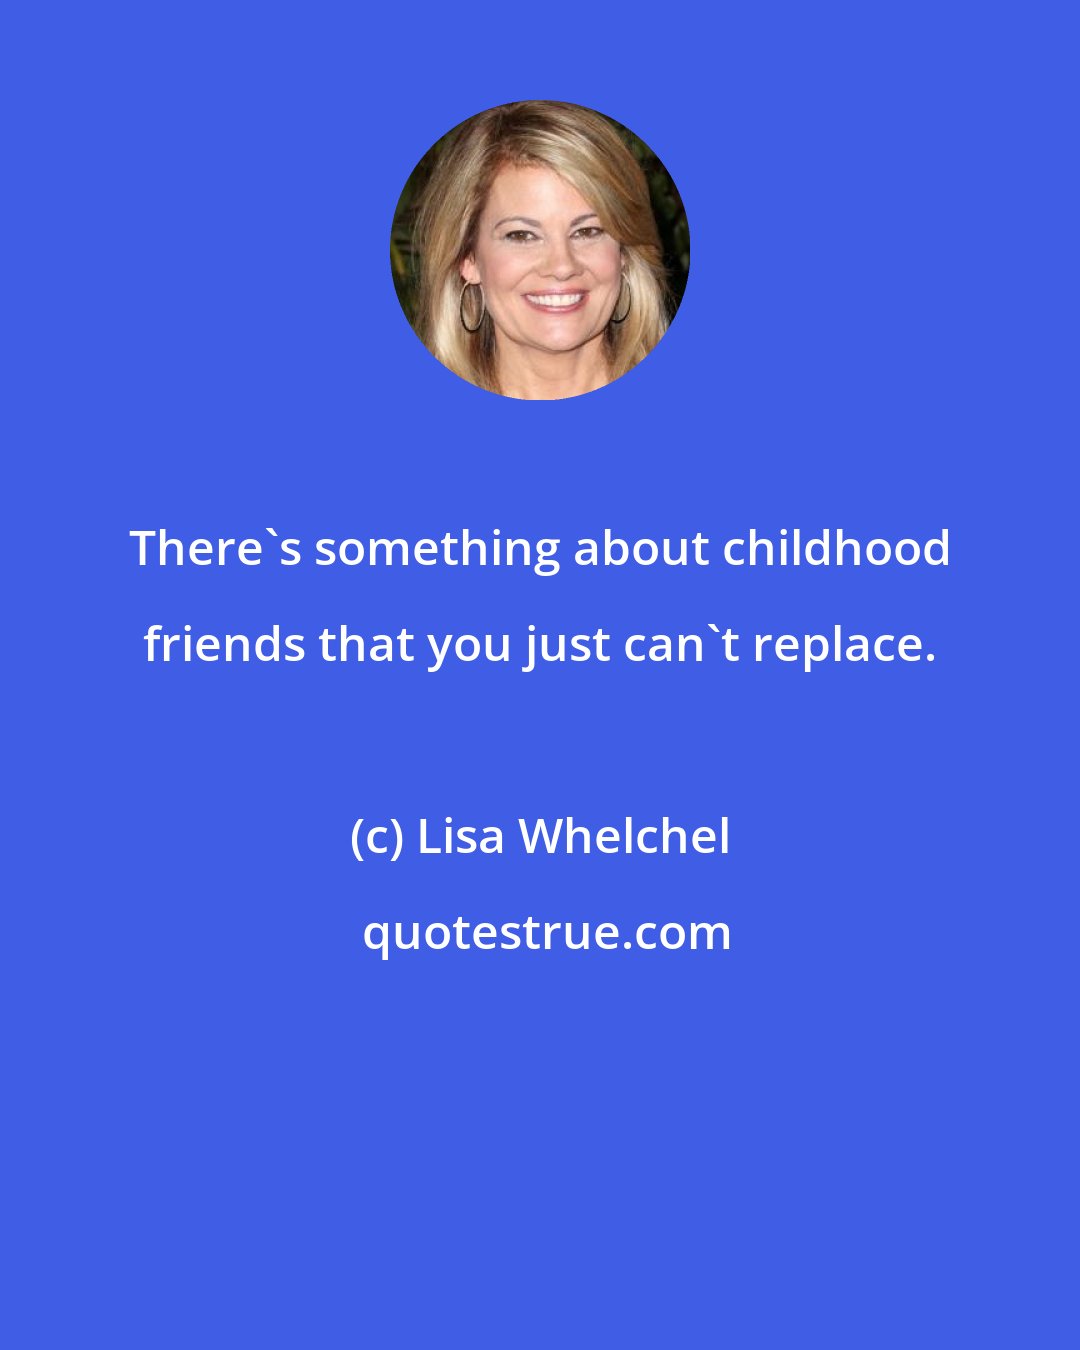 Lisa Whelchel: There's something about childhood friends that you just can't replace.